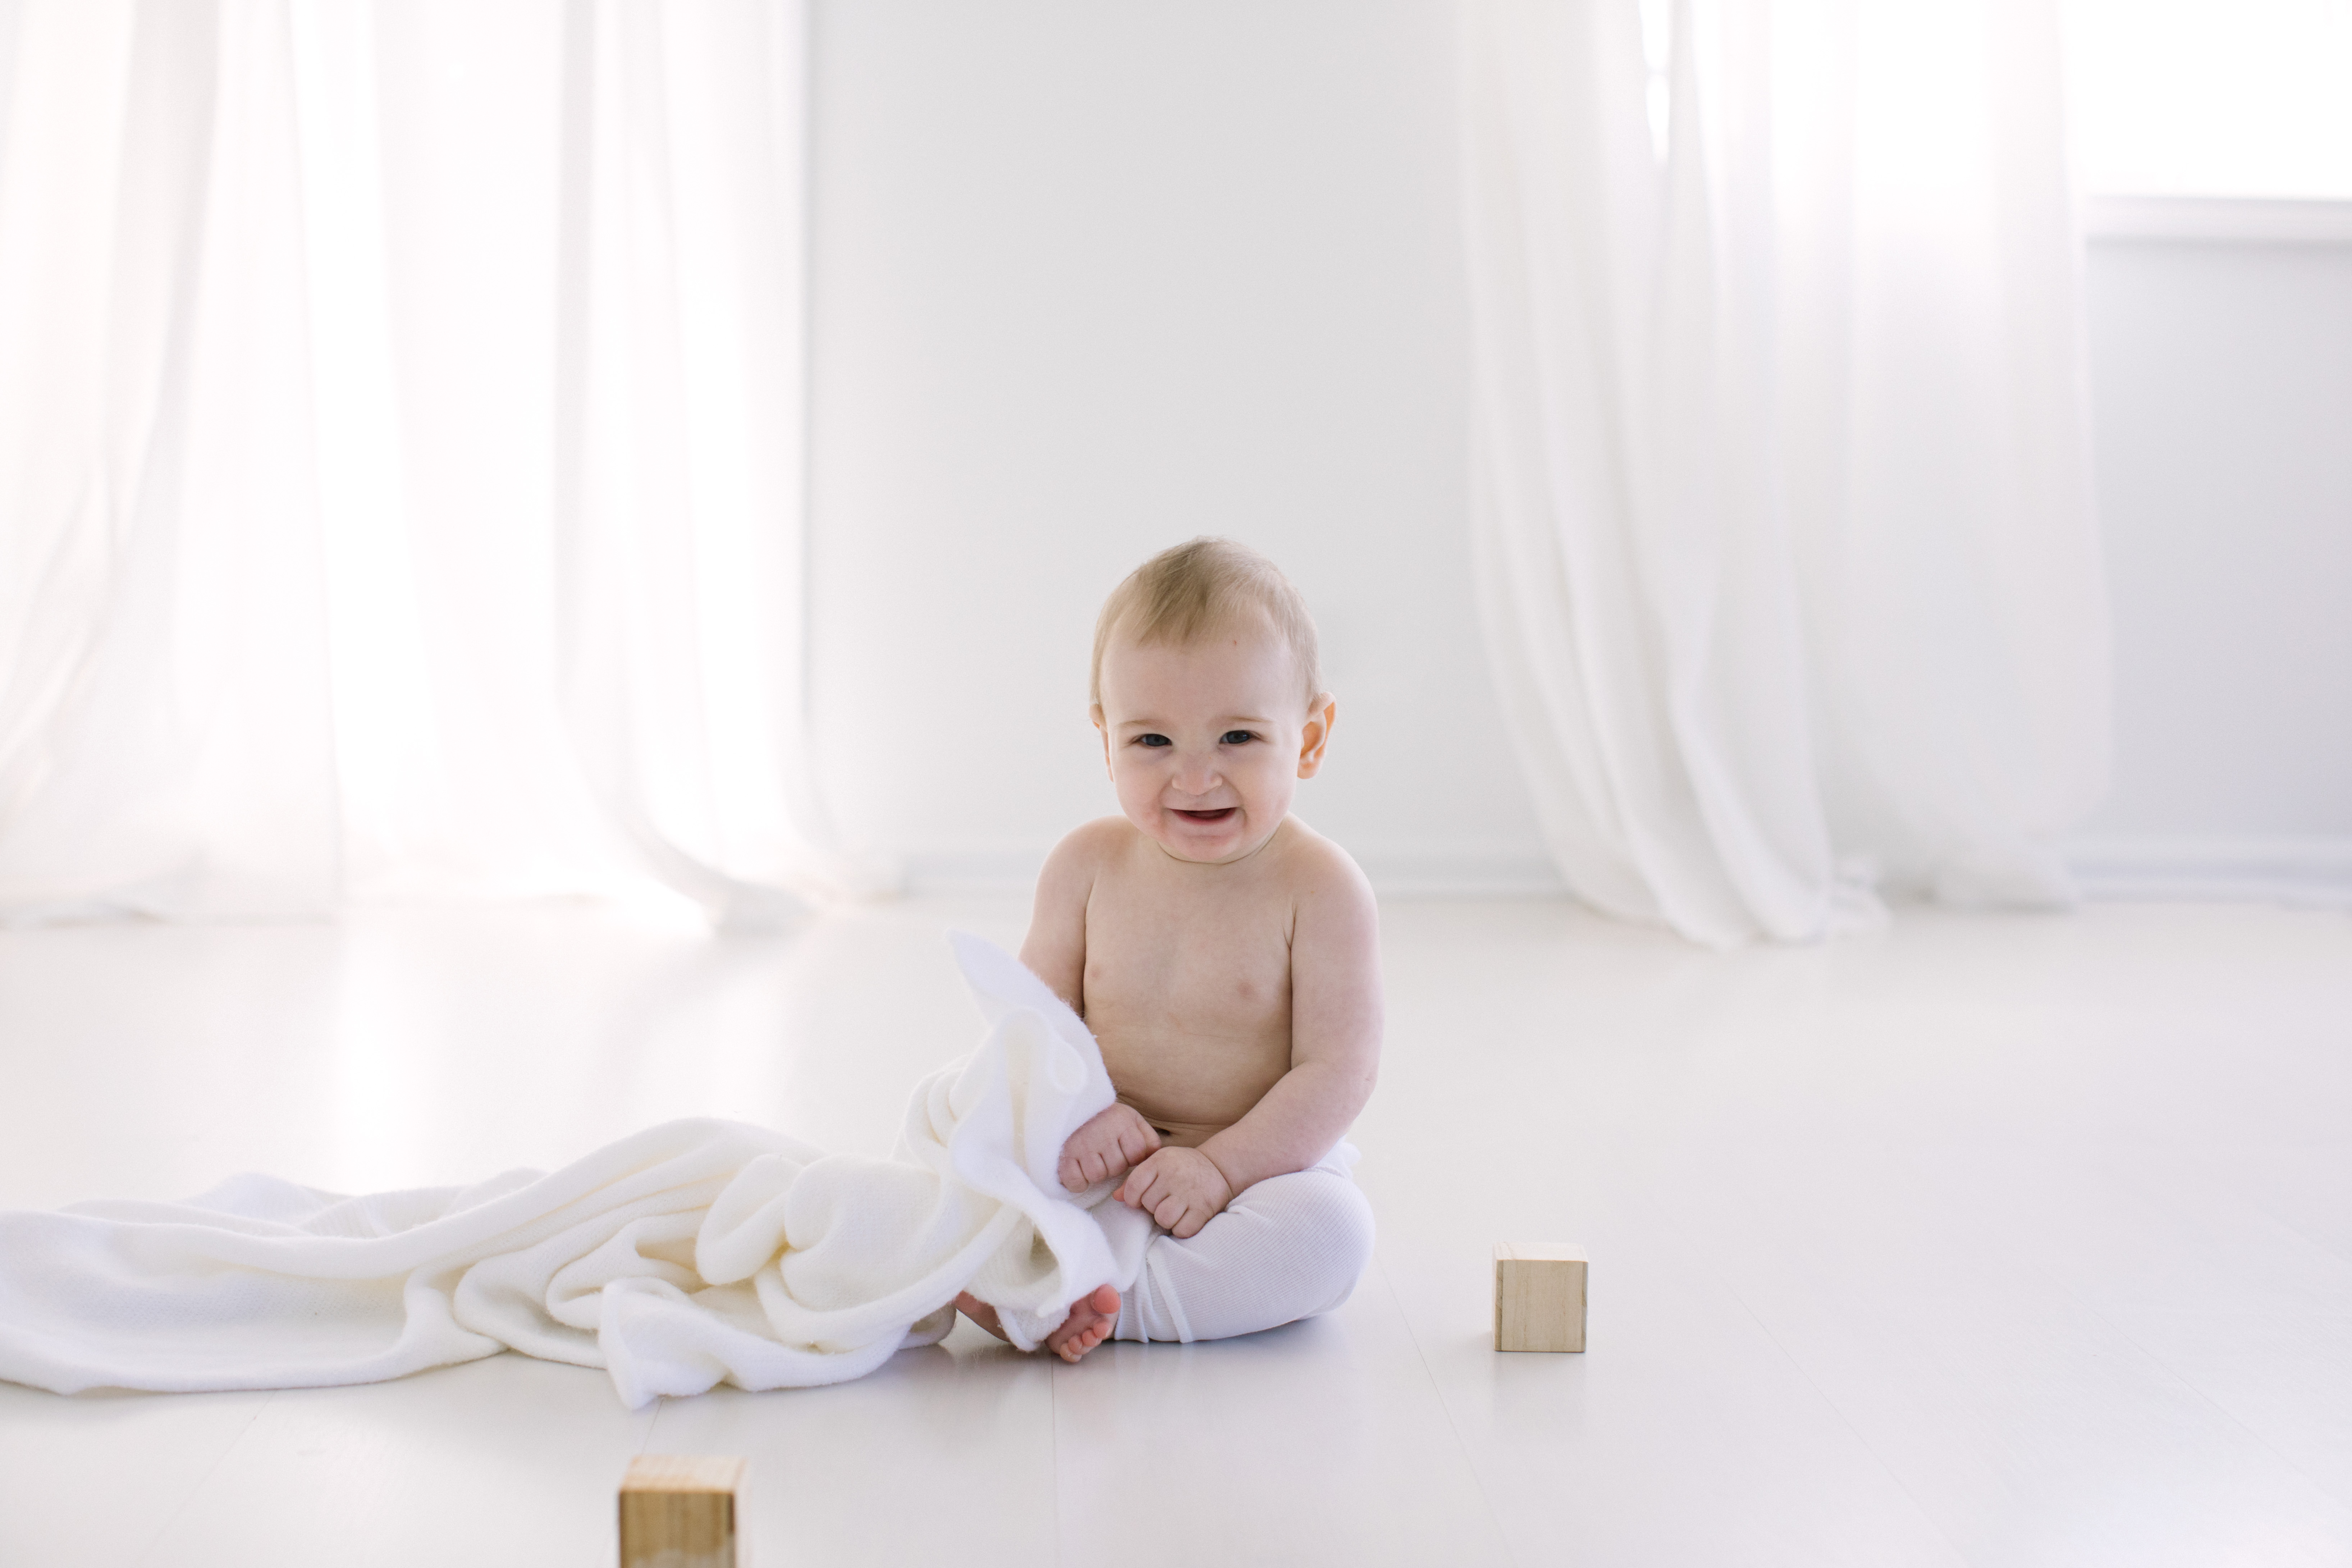 Natural light photography in white studio by Laurie Baker with Elle Baker Photography